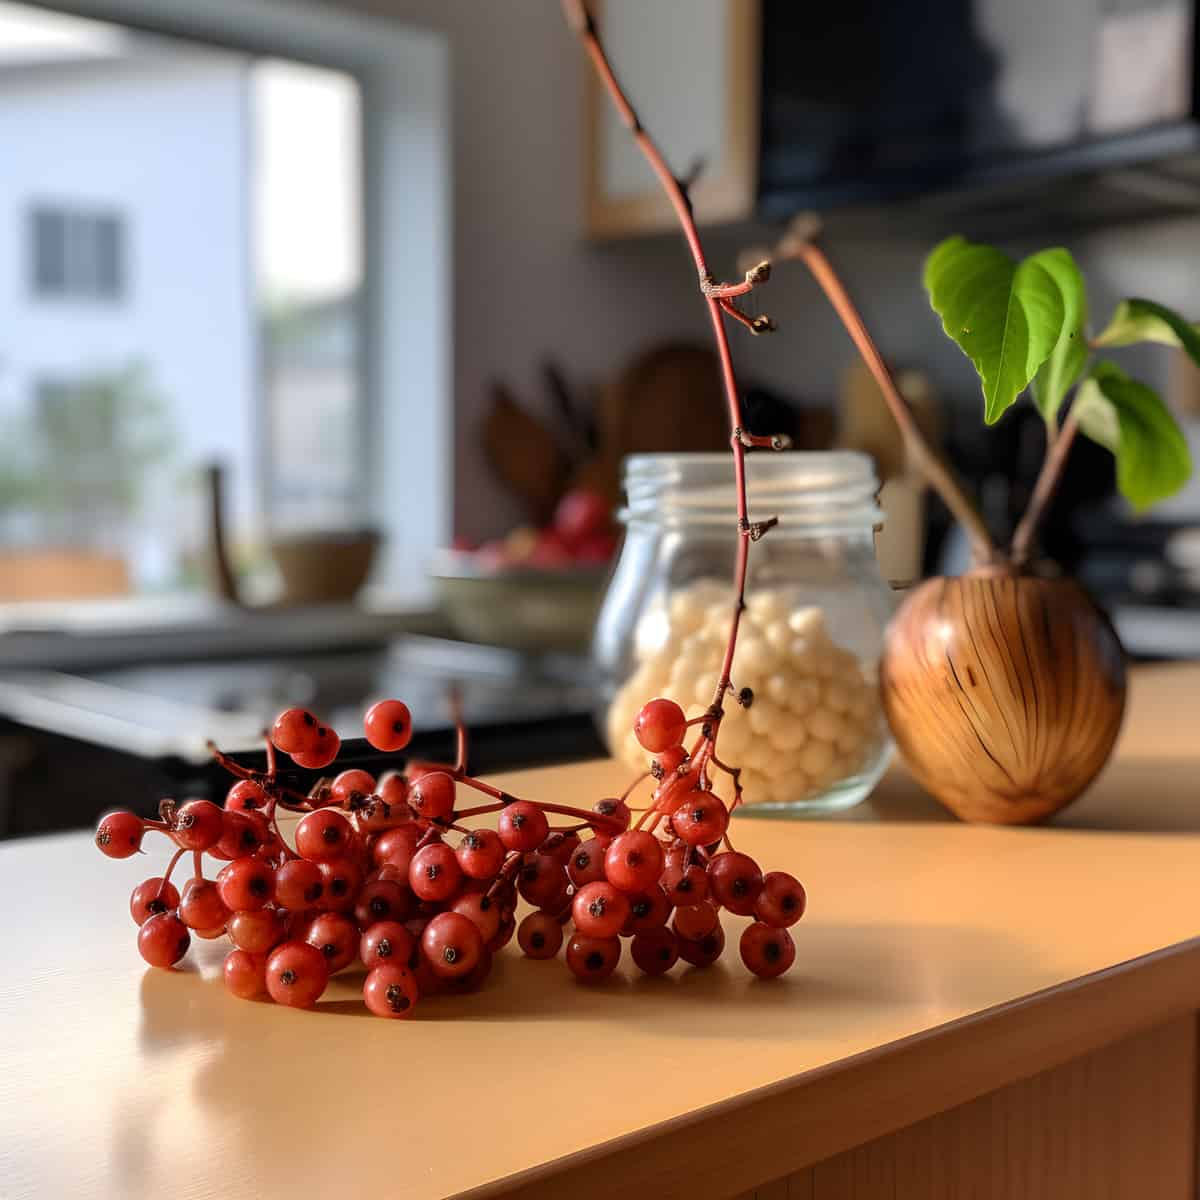 Japanese Silverberry on a kitchen counter